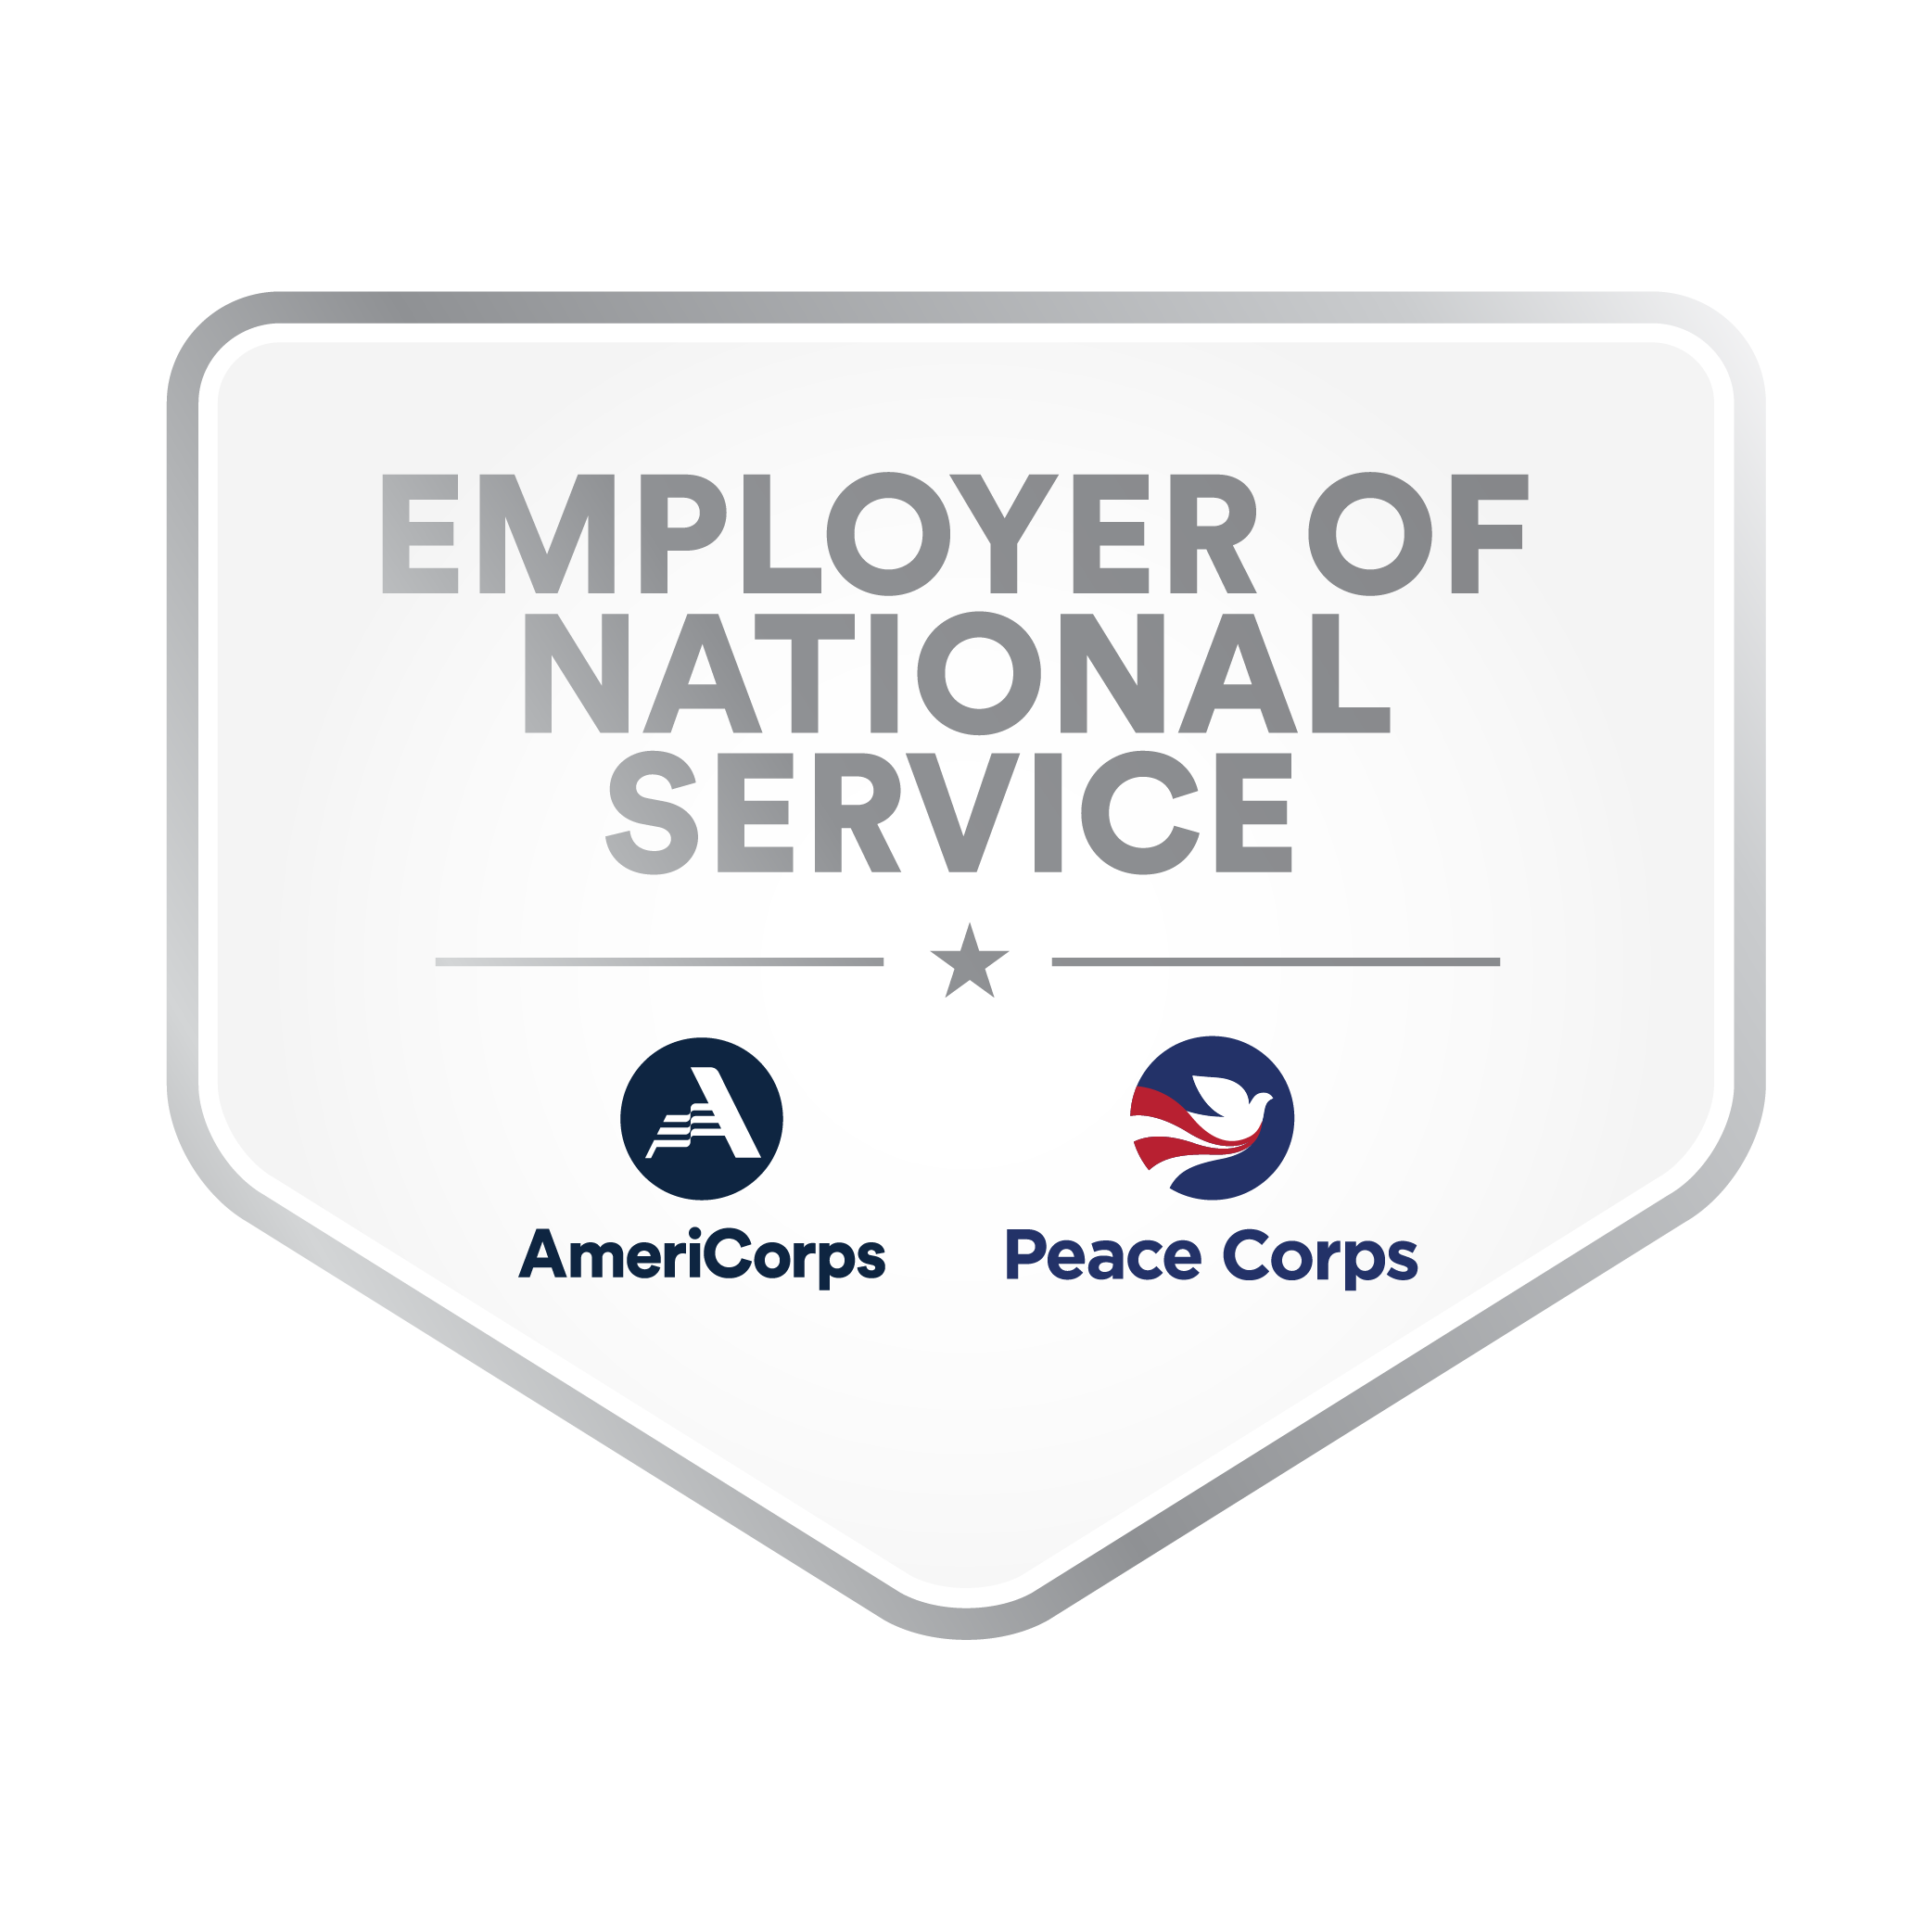 Employer of National Service badge. Includes AmeriCorps and Peace Corps logos.